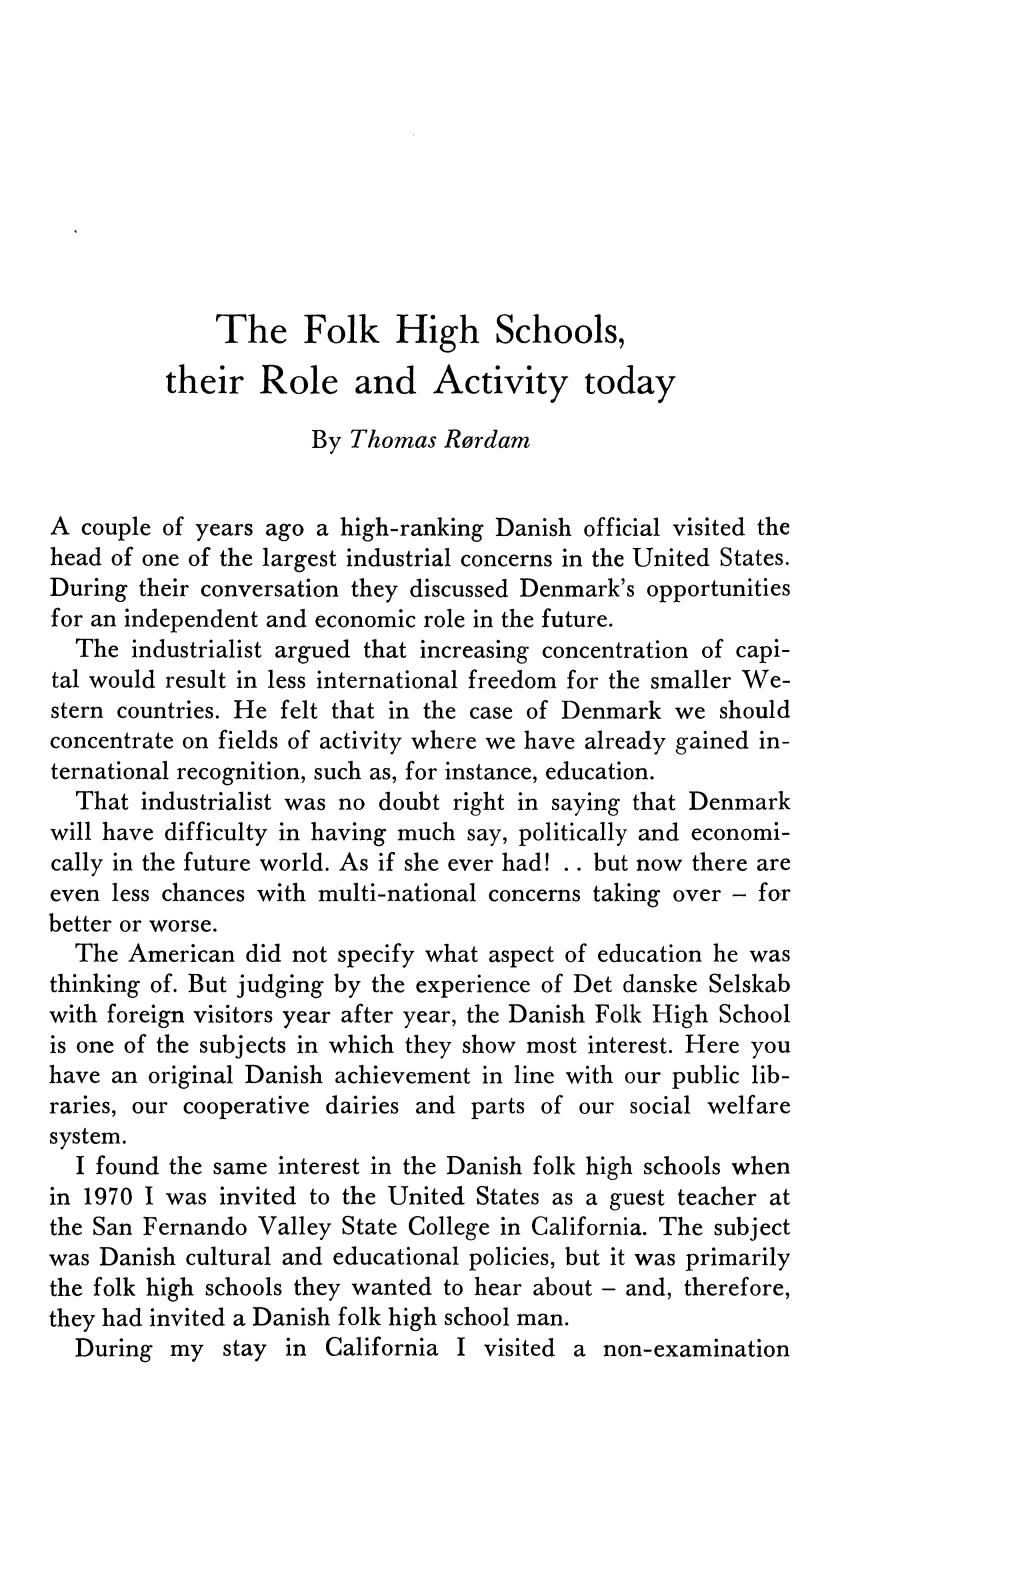 The Folk High Schools, Their Role and Activity Today